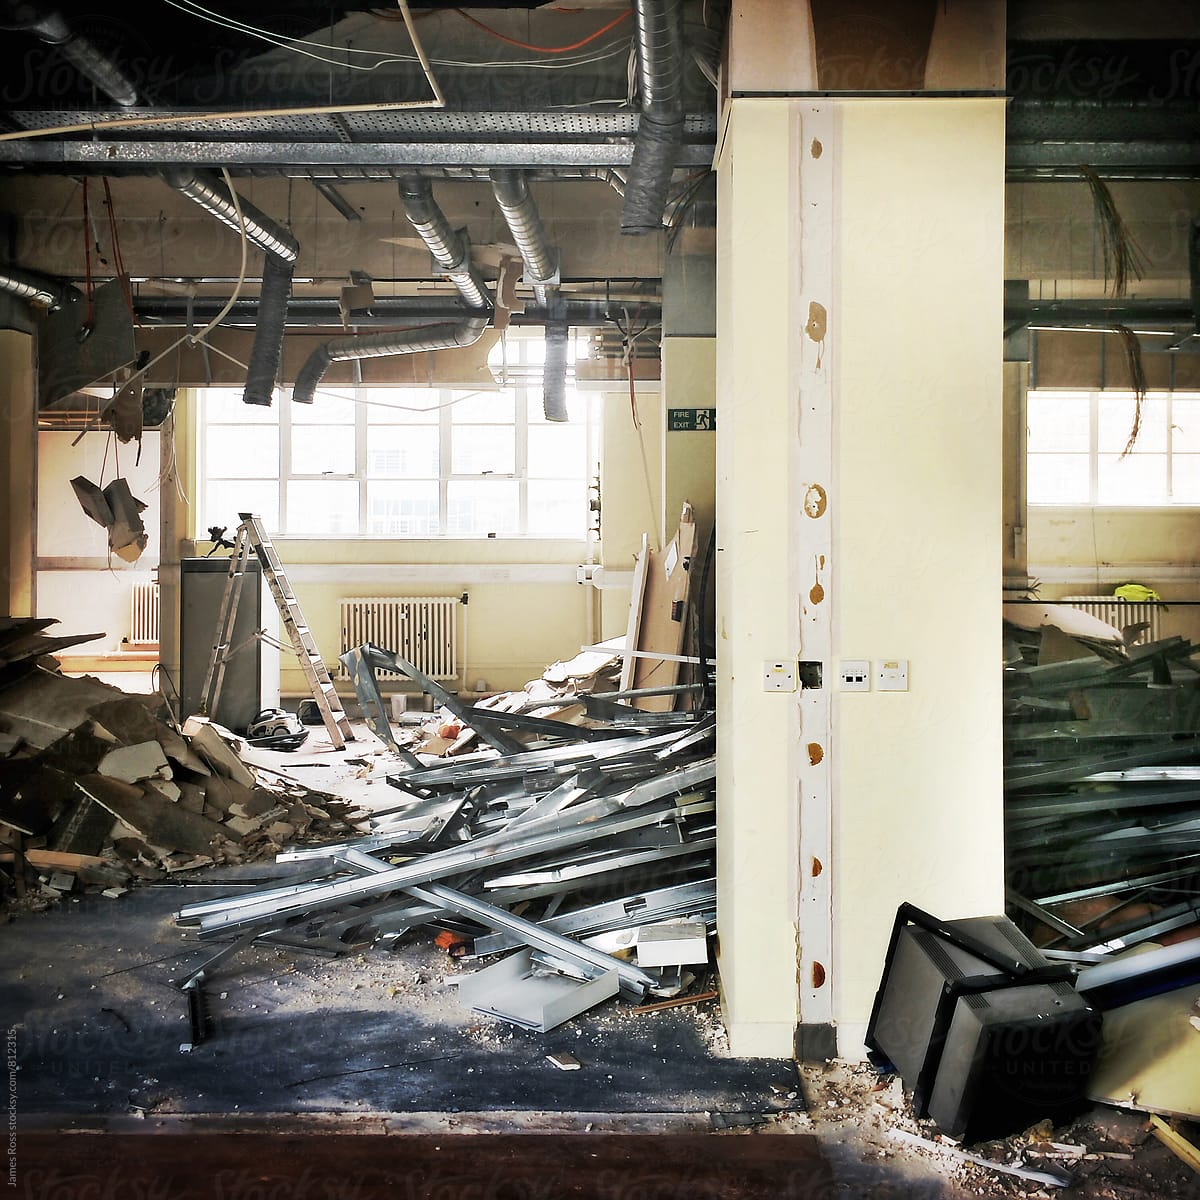 A derelict and abandoned office